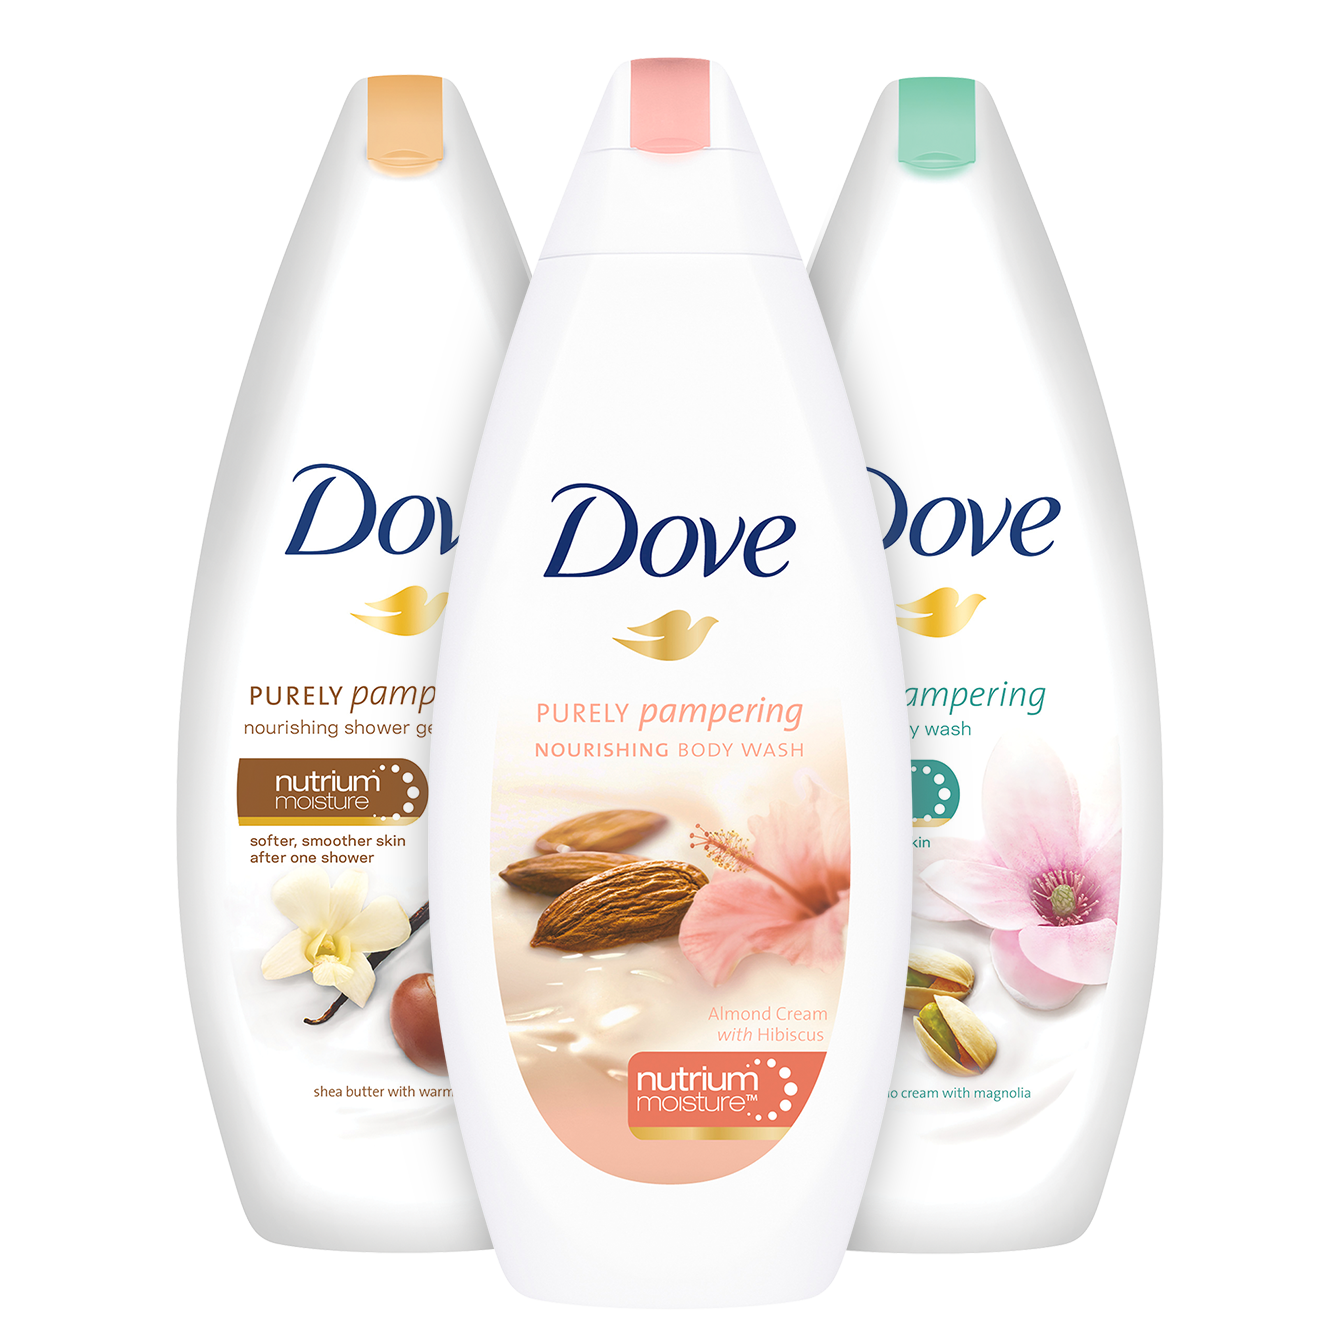 Dove Purely Pampering